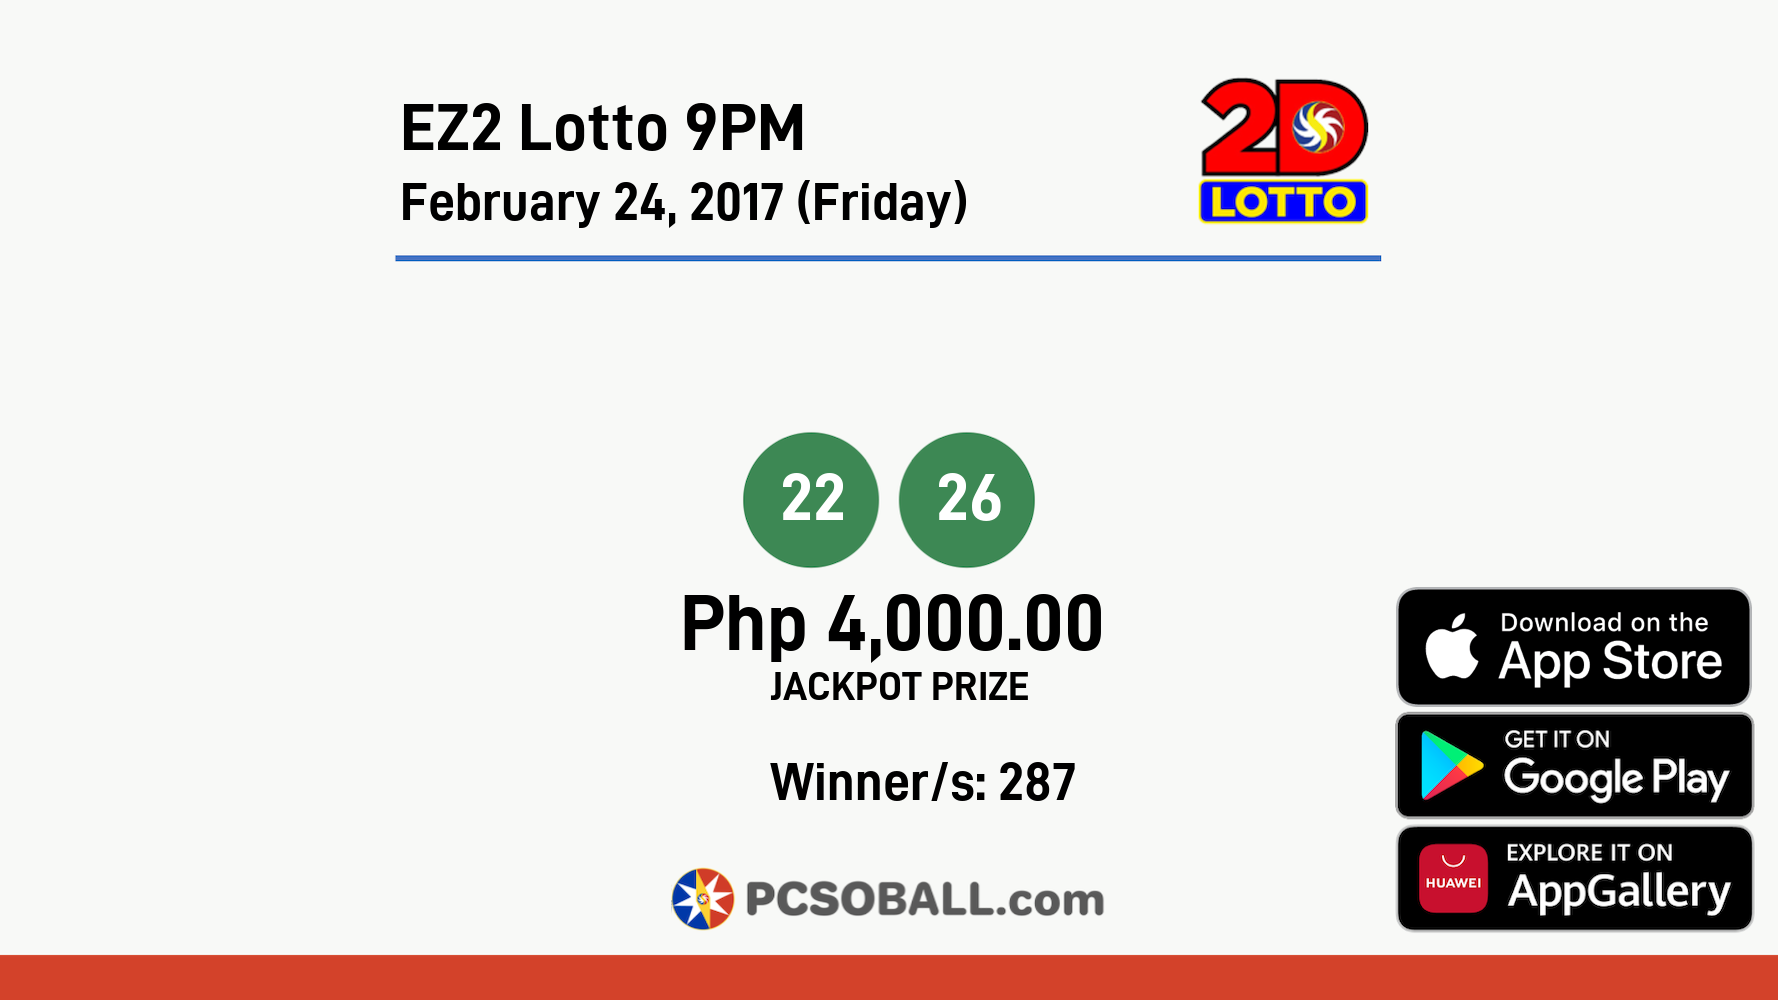 EZ2 Lotto 9PM February 24, 2017 (Friday) Result